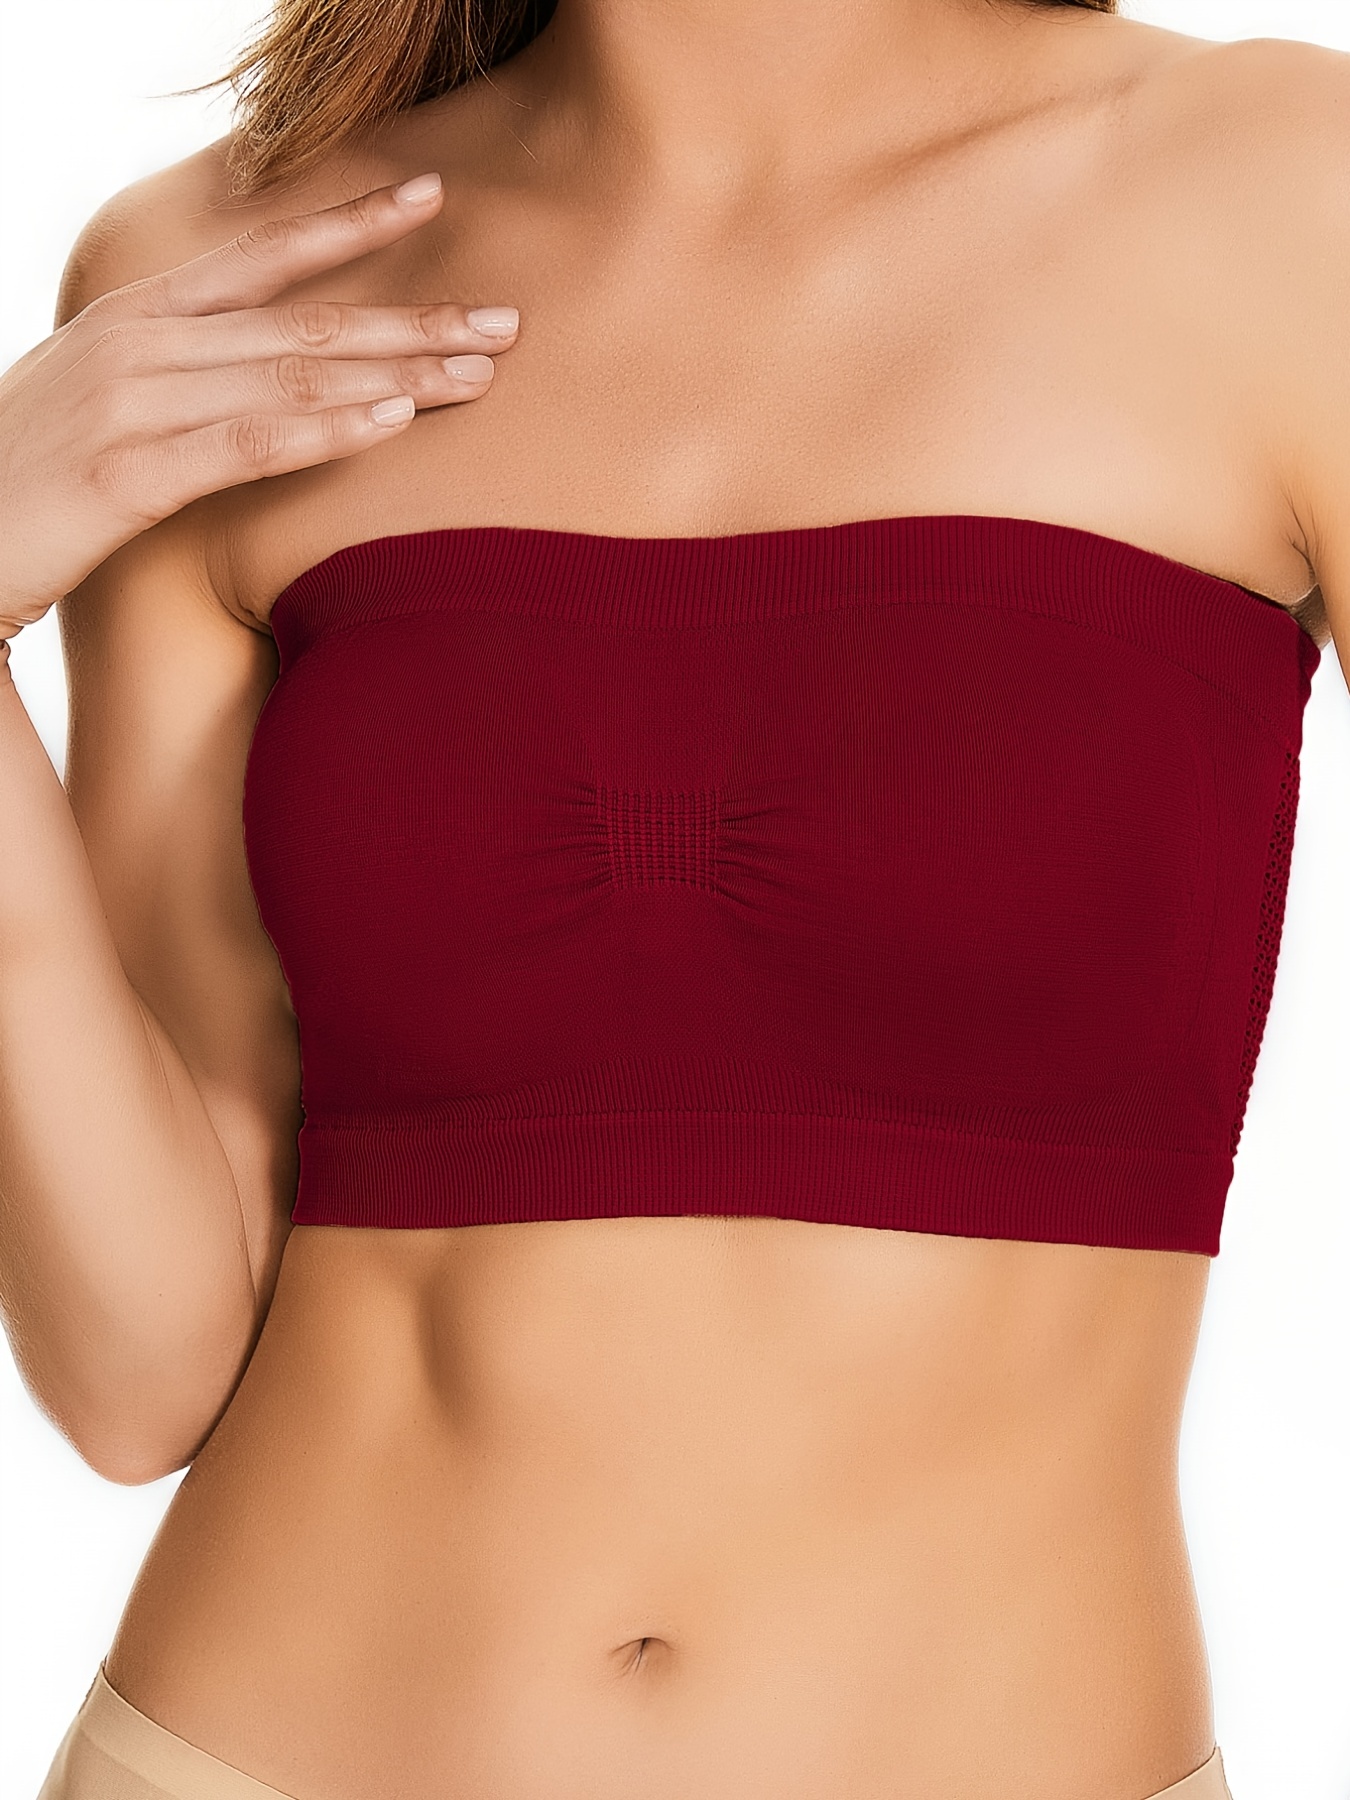 1 Womens Padded Bandeau Tube Crop Top Strapless Bra Removable Pads Stretchy  Red